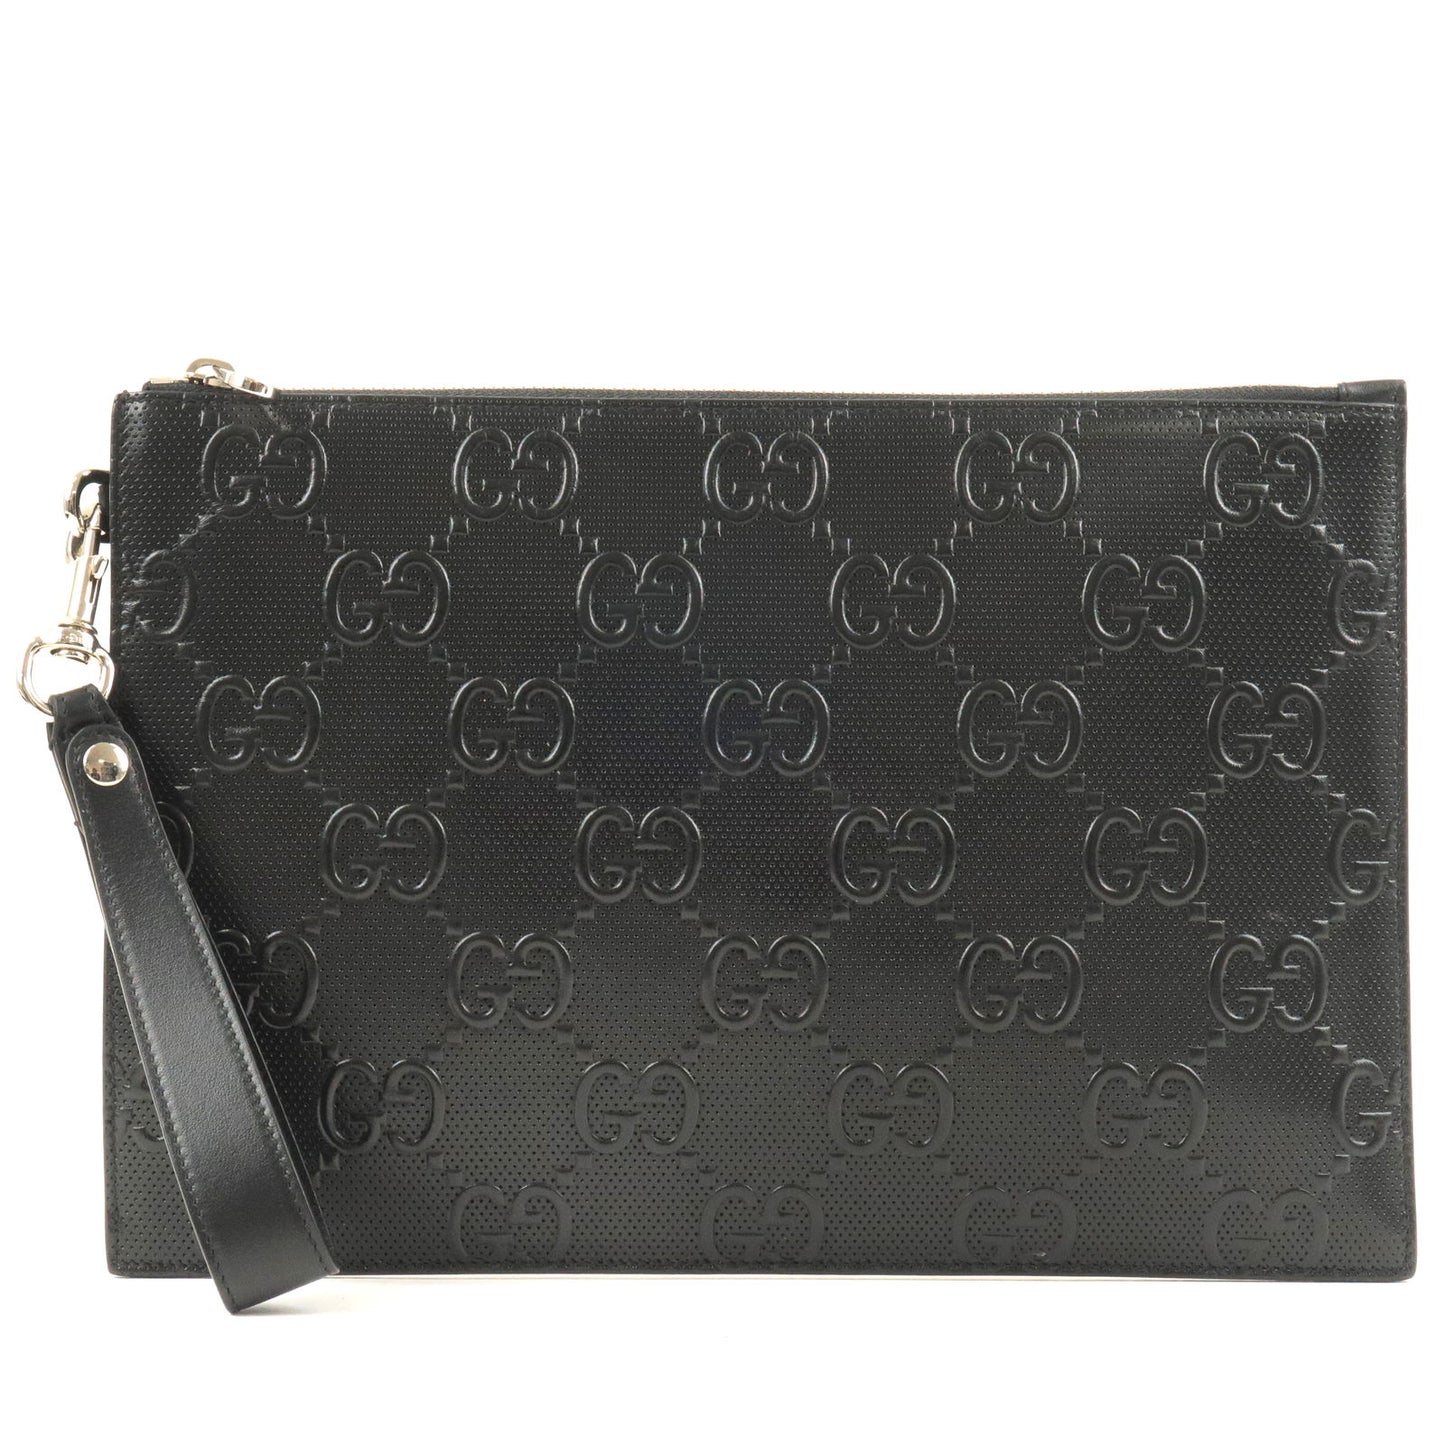 GUCCI-GG-Emboss-Leather-Clutch-Bag-Business-Bag-Black-625569